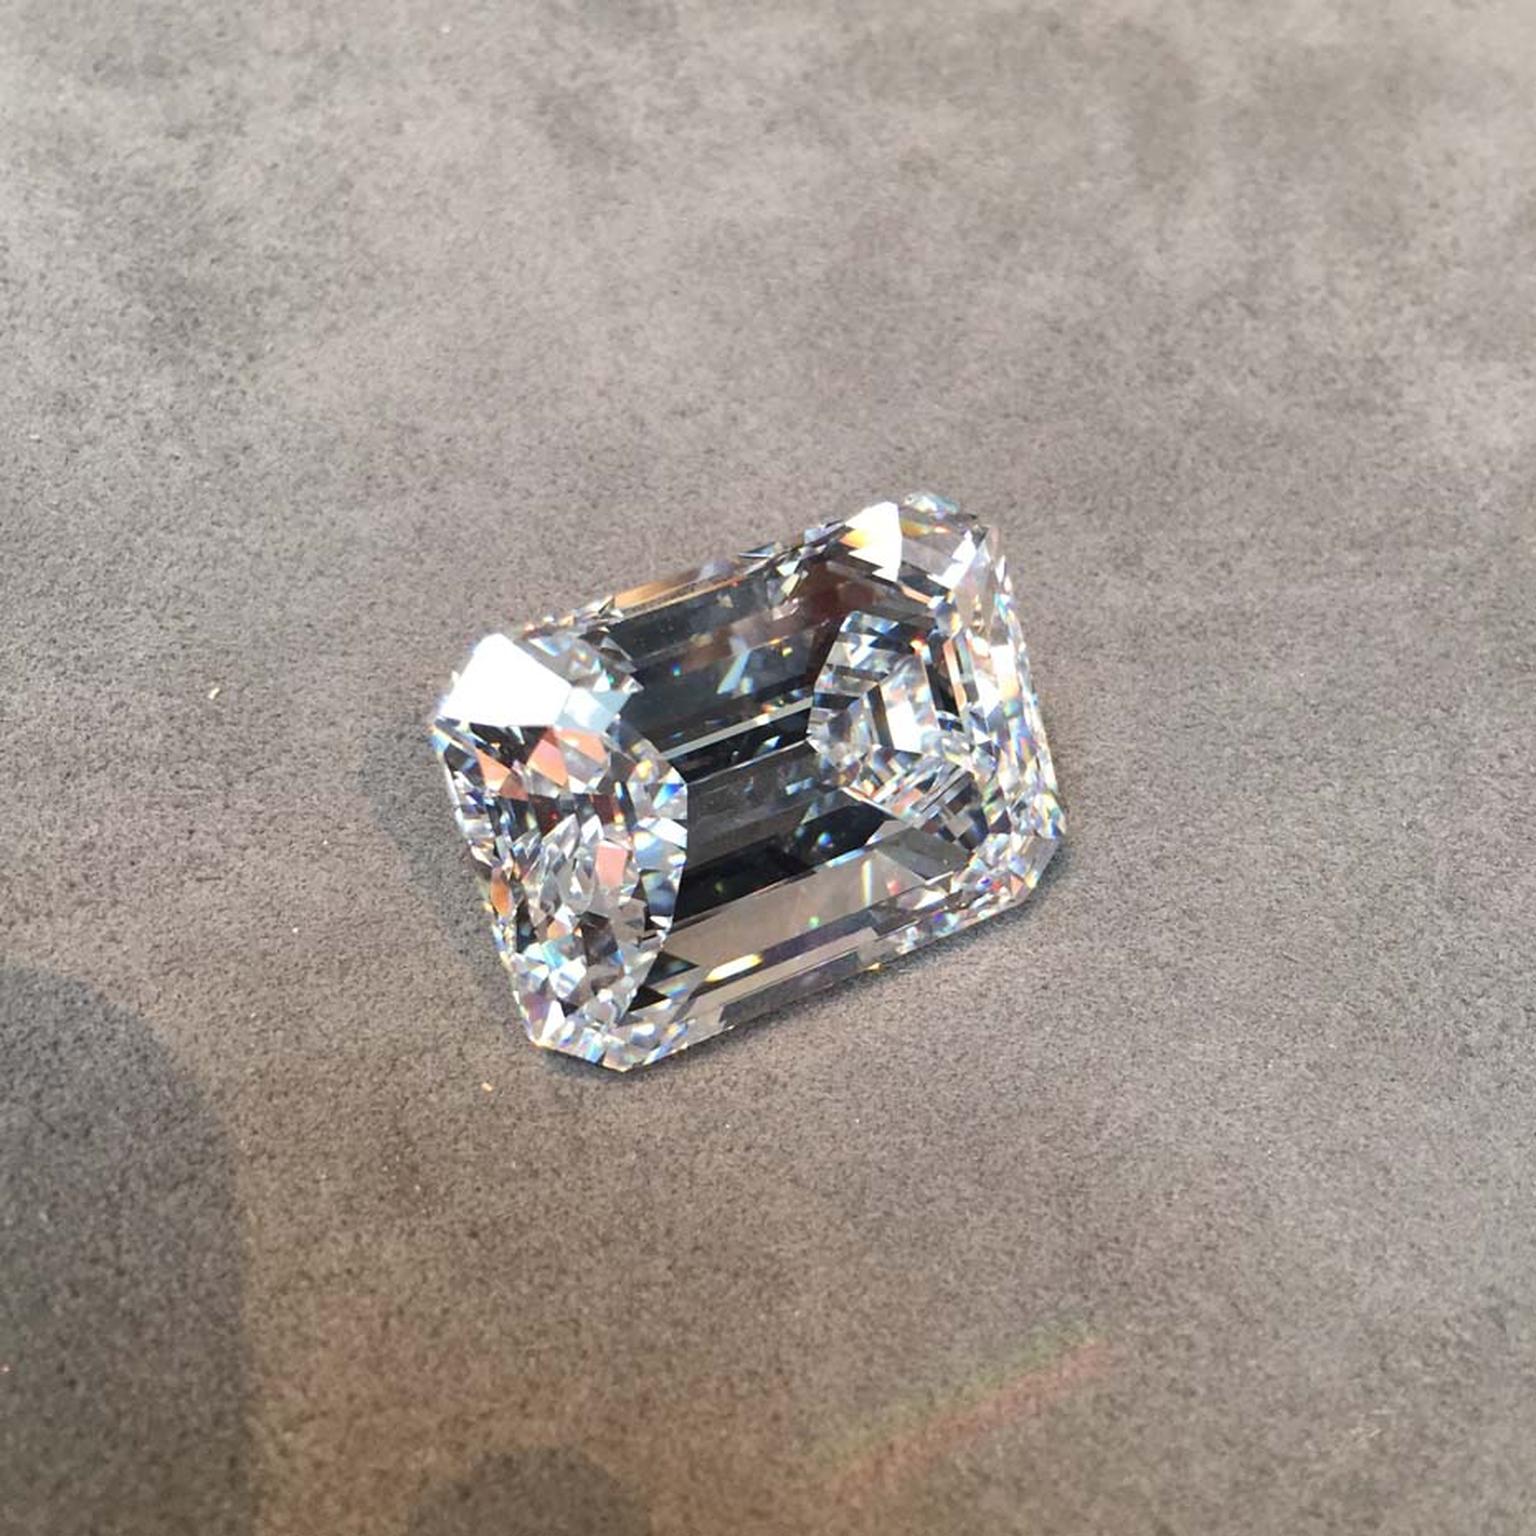 The D color, Internally Flawless, Type IIA stone on show at Sotheby's in London is a spectacular specimen of diamond perfection.